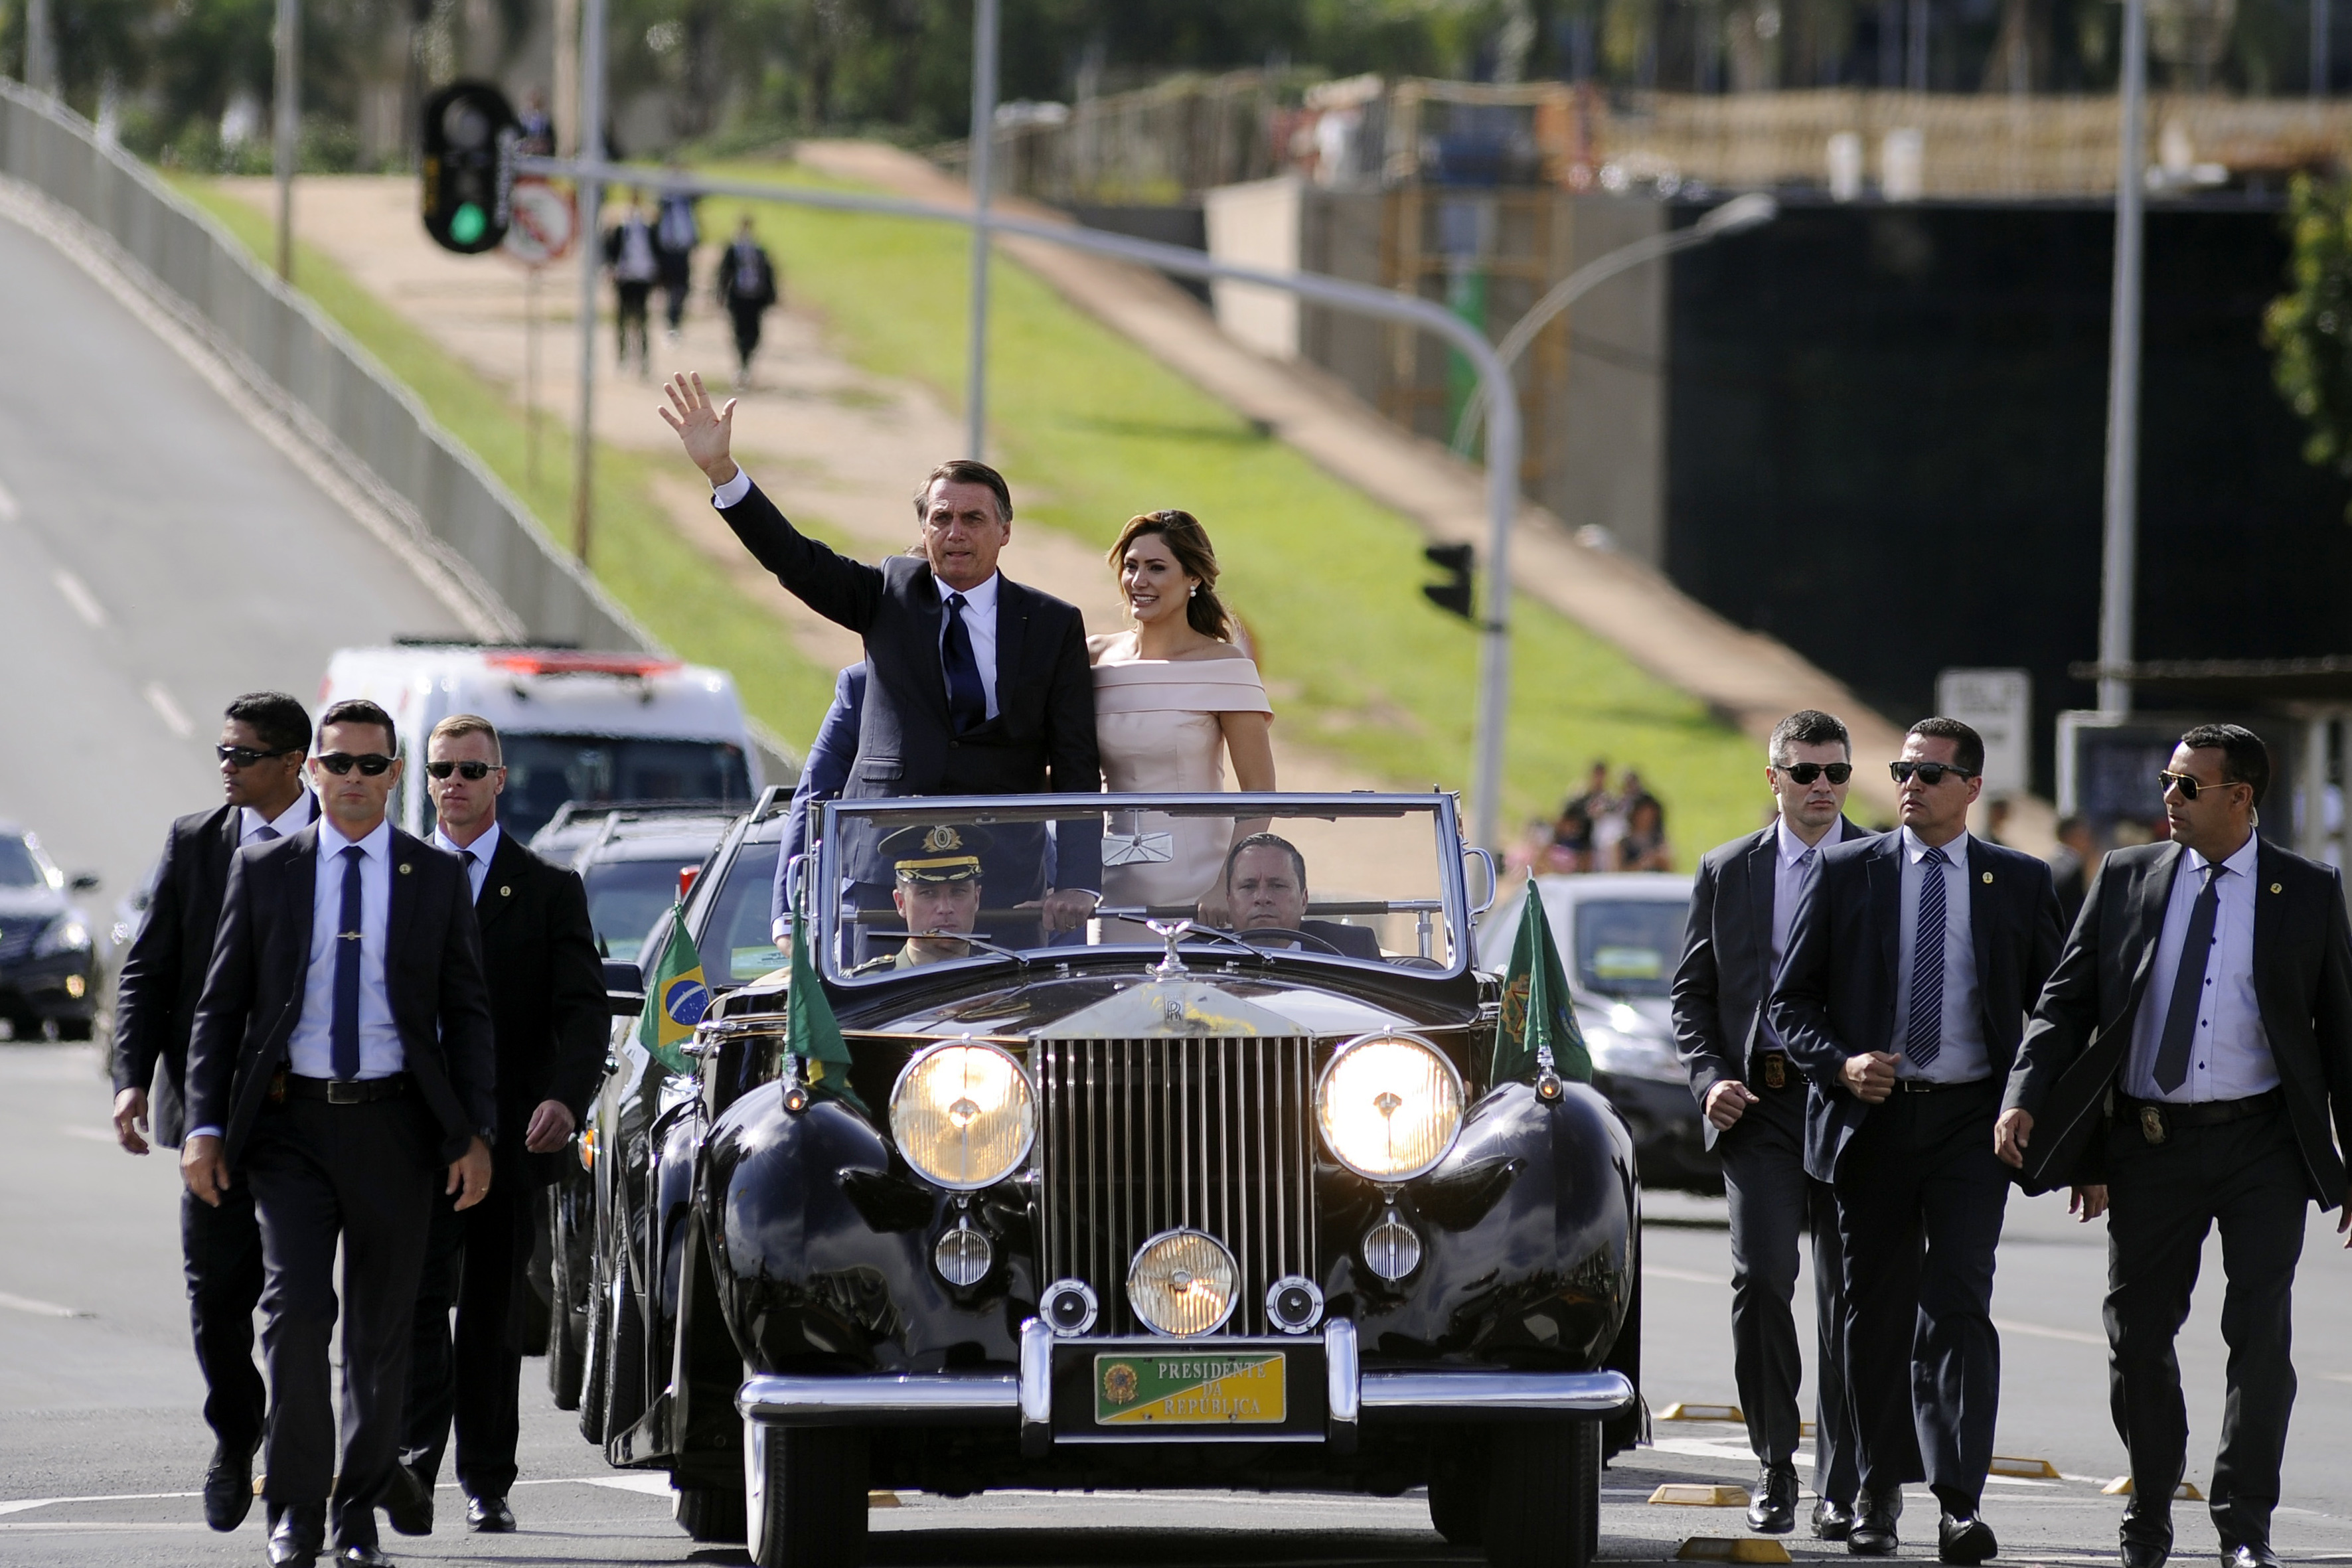 01 January 2019, Brazil, Brasilia: Brazil's President Jair Bolsonaro waves while he and his wife Michelle drive through the capital Brasilia in an open Rolls Royce. The ultra-right ex-military Jair Bolsonaro has been sworn in as the new president of Brazil. The 63-year-old took his oath of office in Congress on Tuesday. Photo by: Alan Morici/picture-alliance/dpa/AP Images